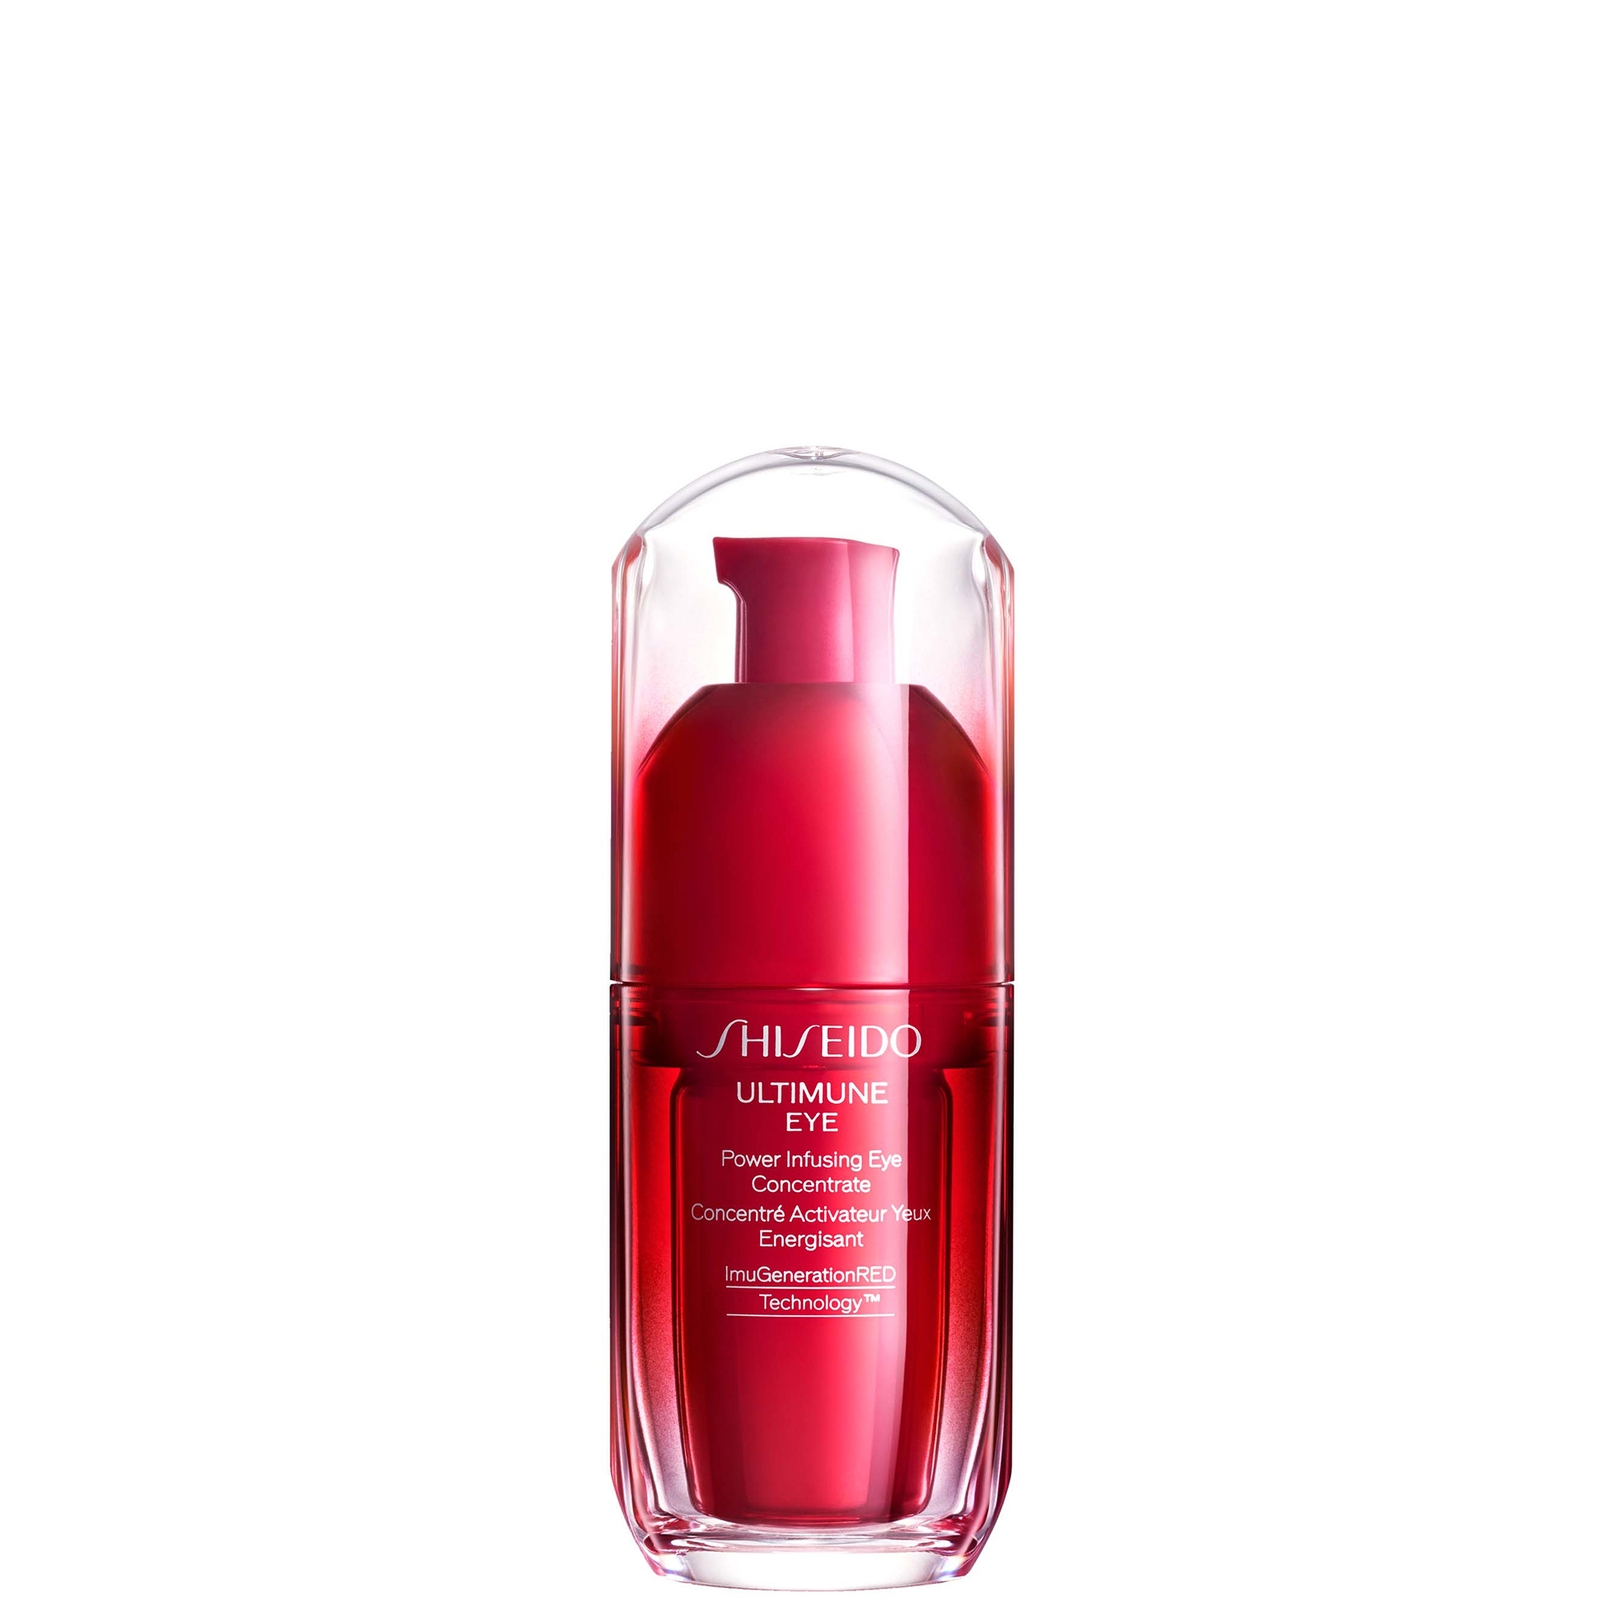 Photos - Cream / Lotion Shiseido Exclusive Ultimune Power Infusing Eye Concentrate 15ml 